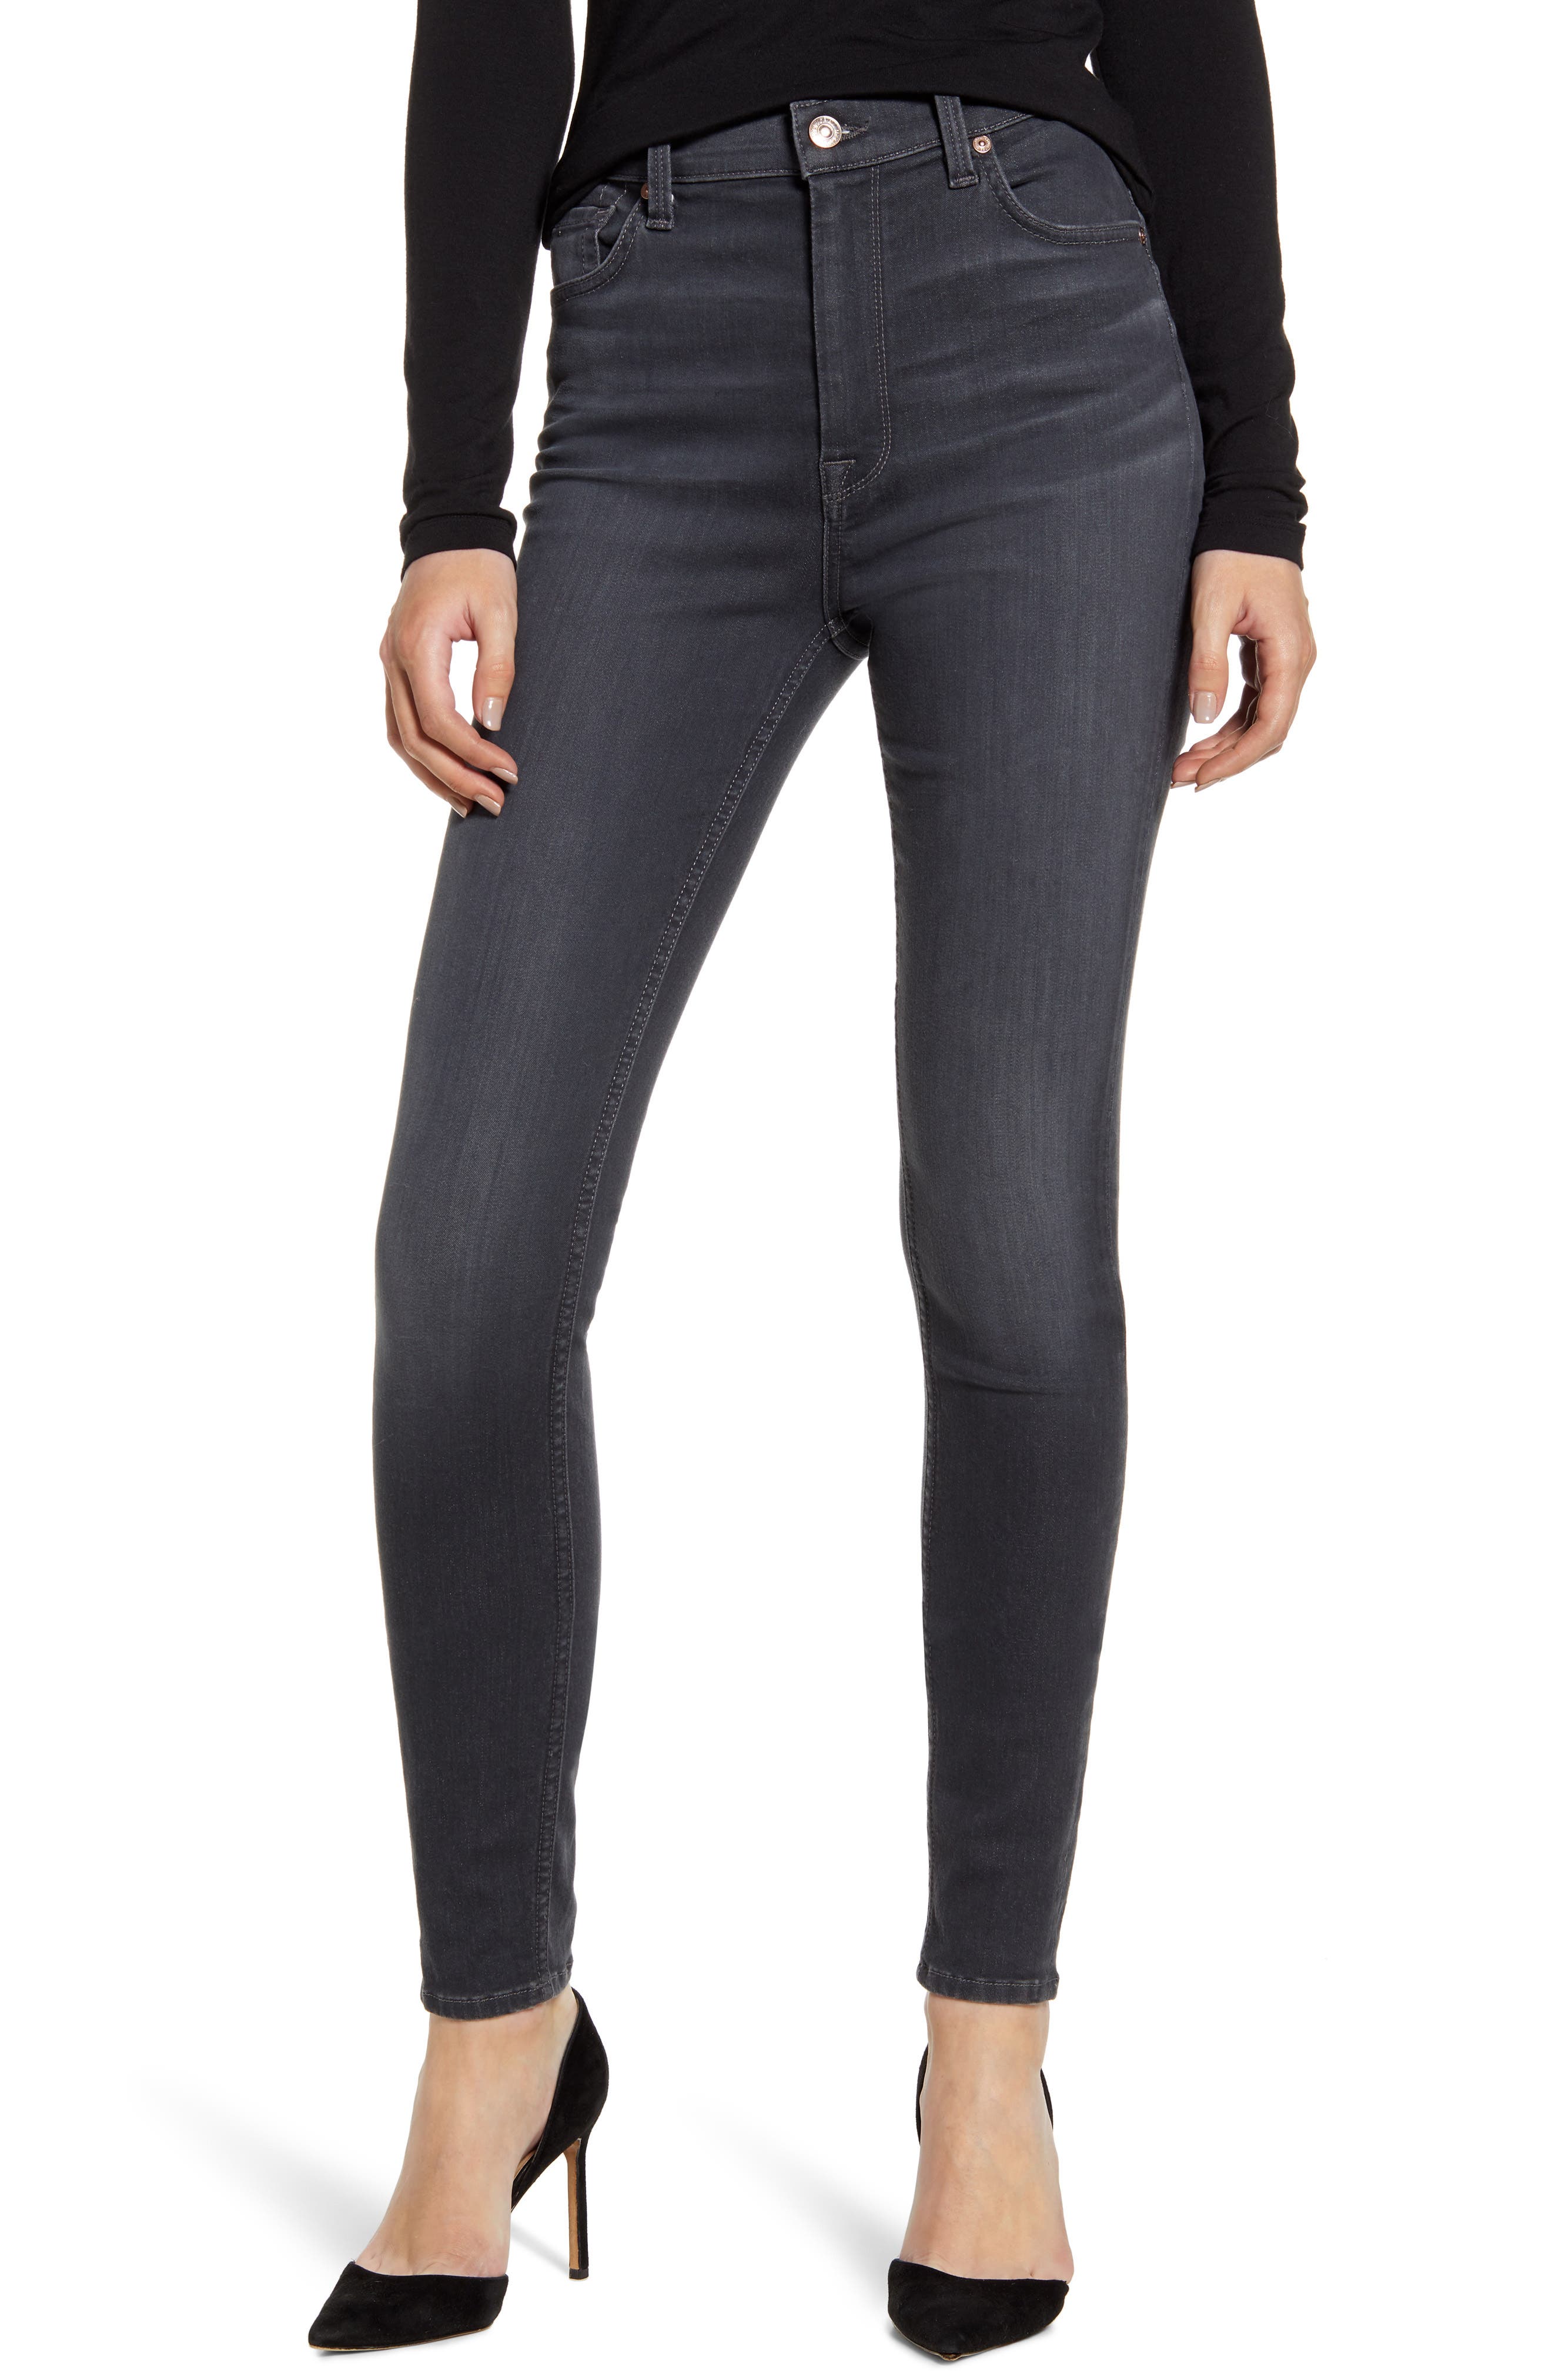 seven for all mankind black skinny jeans